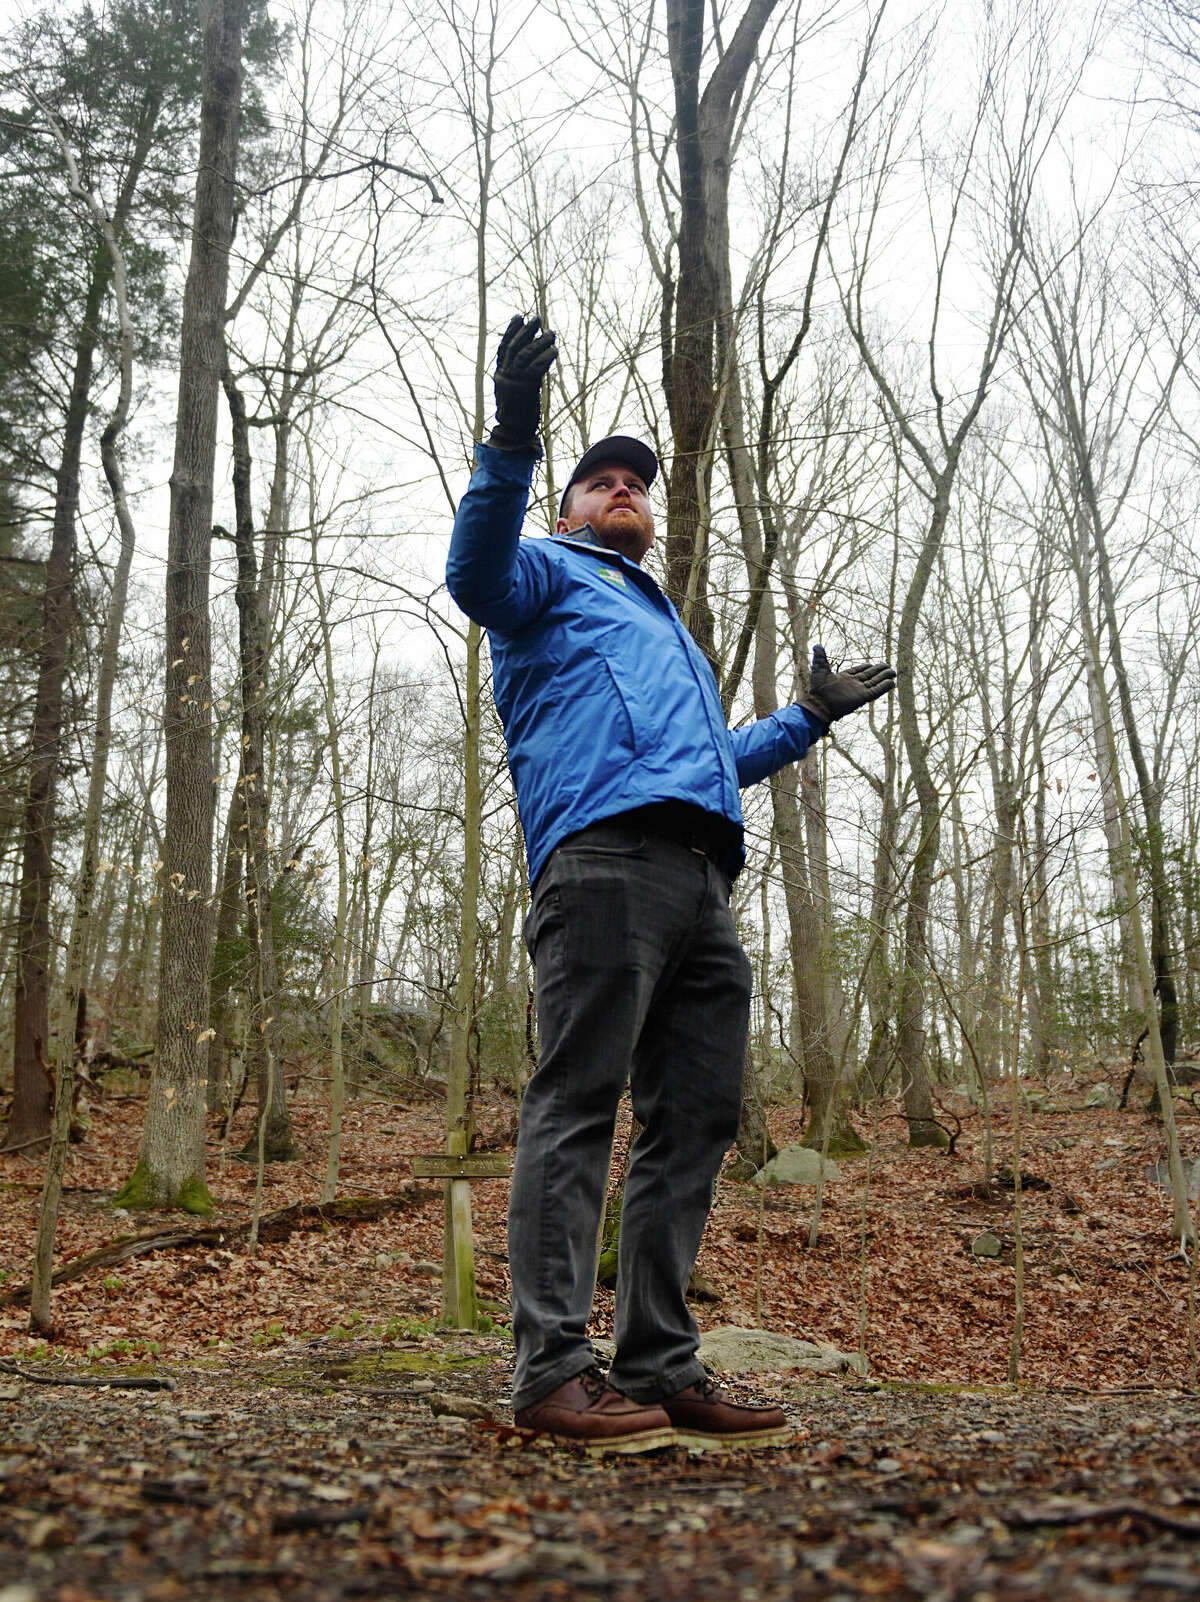 Greenwich Land Trust Director of Land Stewardship Chris Aldrich leads a hike in Mianus River Park on the border of Stamford and Greenwich, Conn. Tuesday, Feb. 21, 2023. The Friends of Mianus River Park and the Greenwich Land Trust led a winter walk to show hikers the natural and historical features of the park.